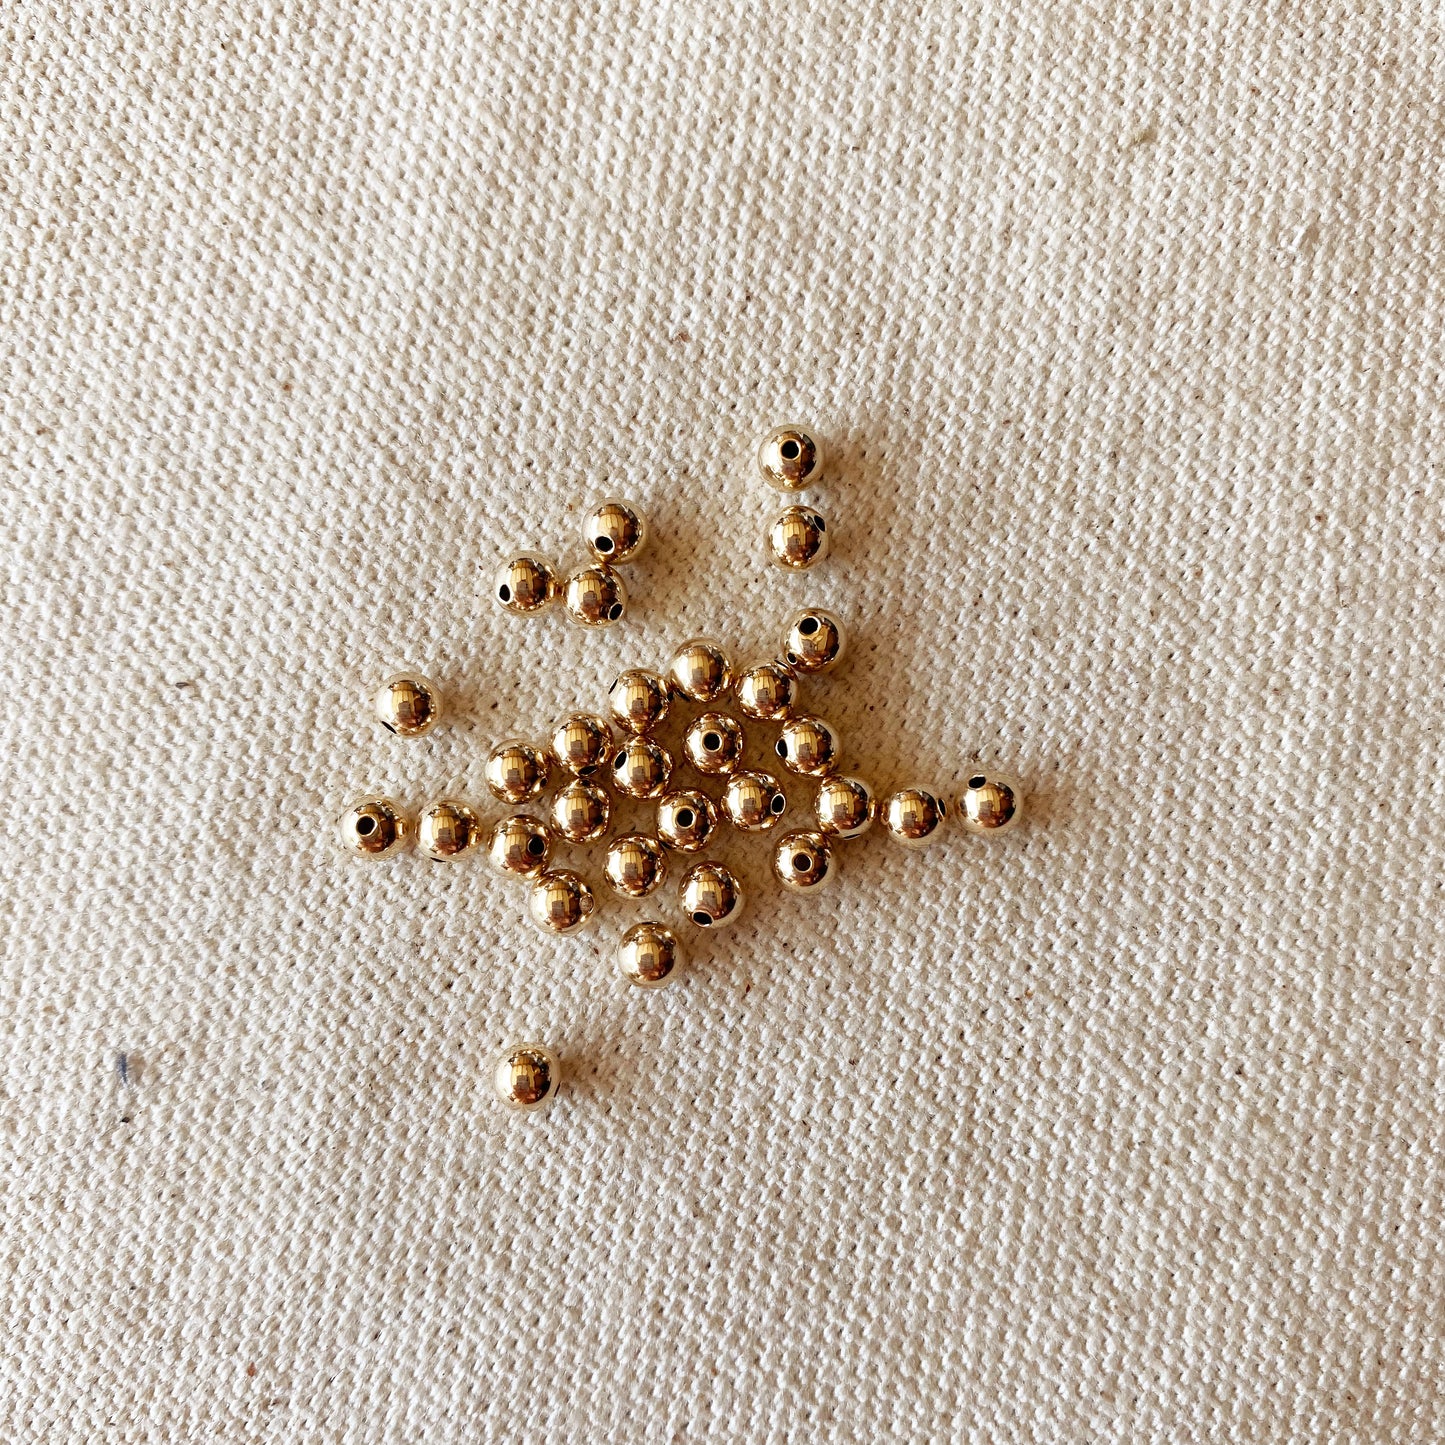 GoldFi 14k Gold Filled 4.0mm Bead For Jewelry Making.